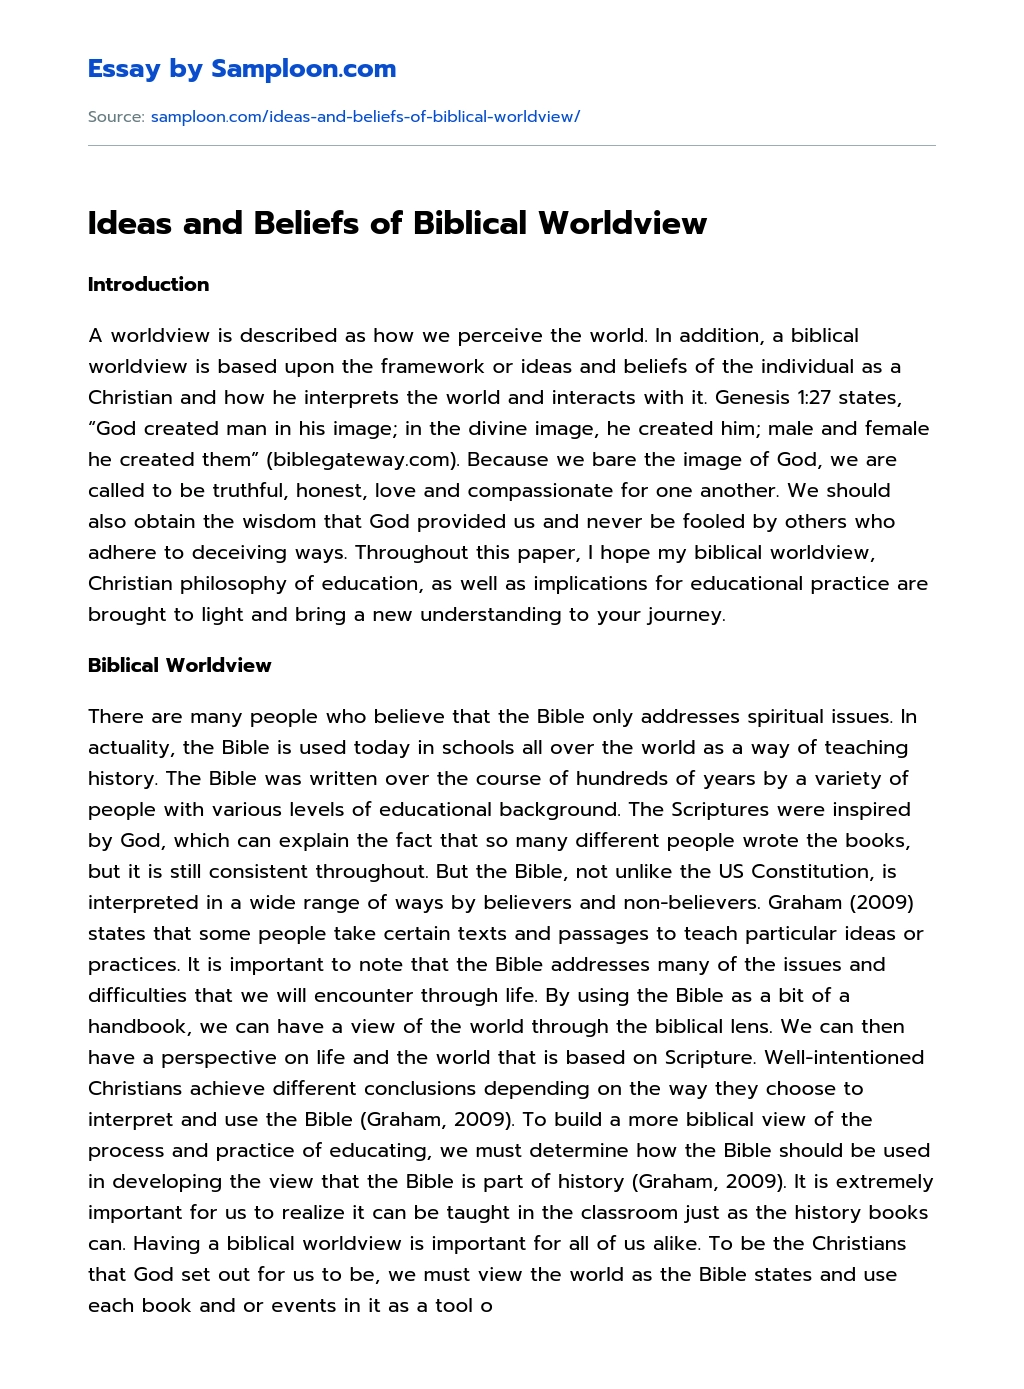 Ideas and Beliefs of Biblical Worldview essay